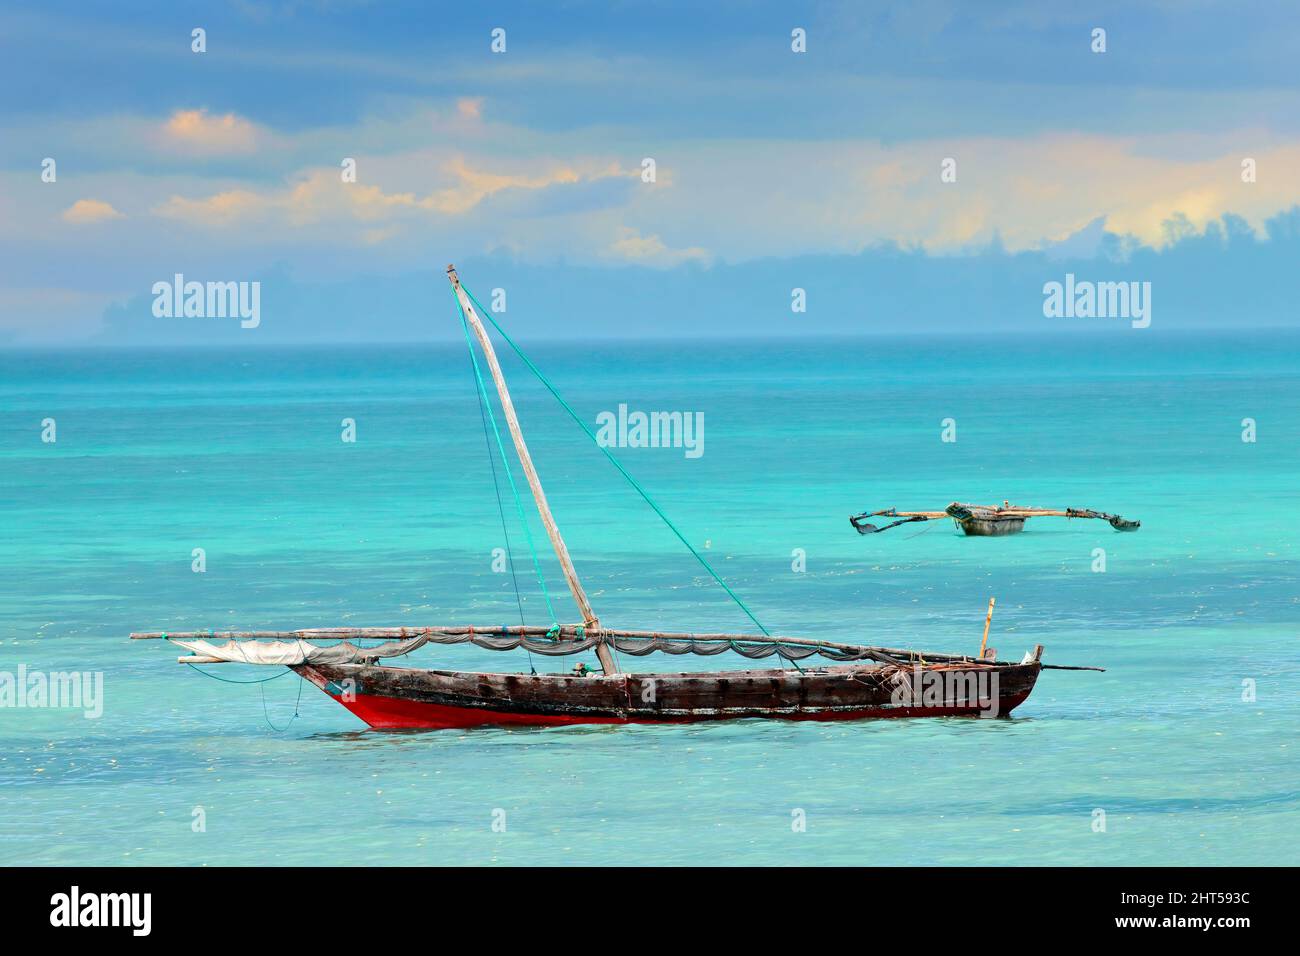 A wooden sailboat  (dhow) on the clear turquoise water of Zanzibar, Tanzania Stock Photo